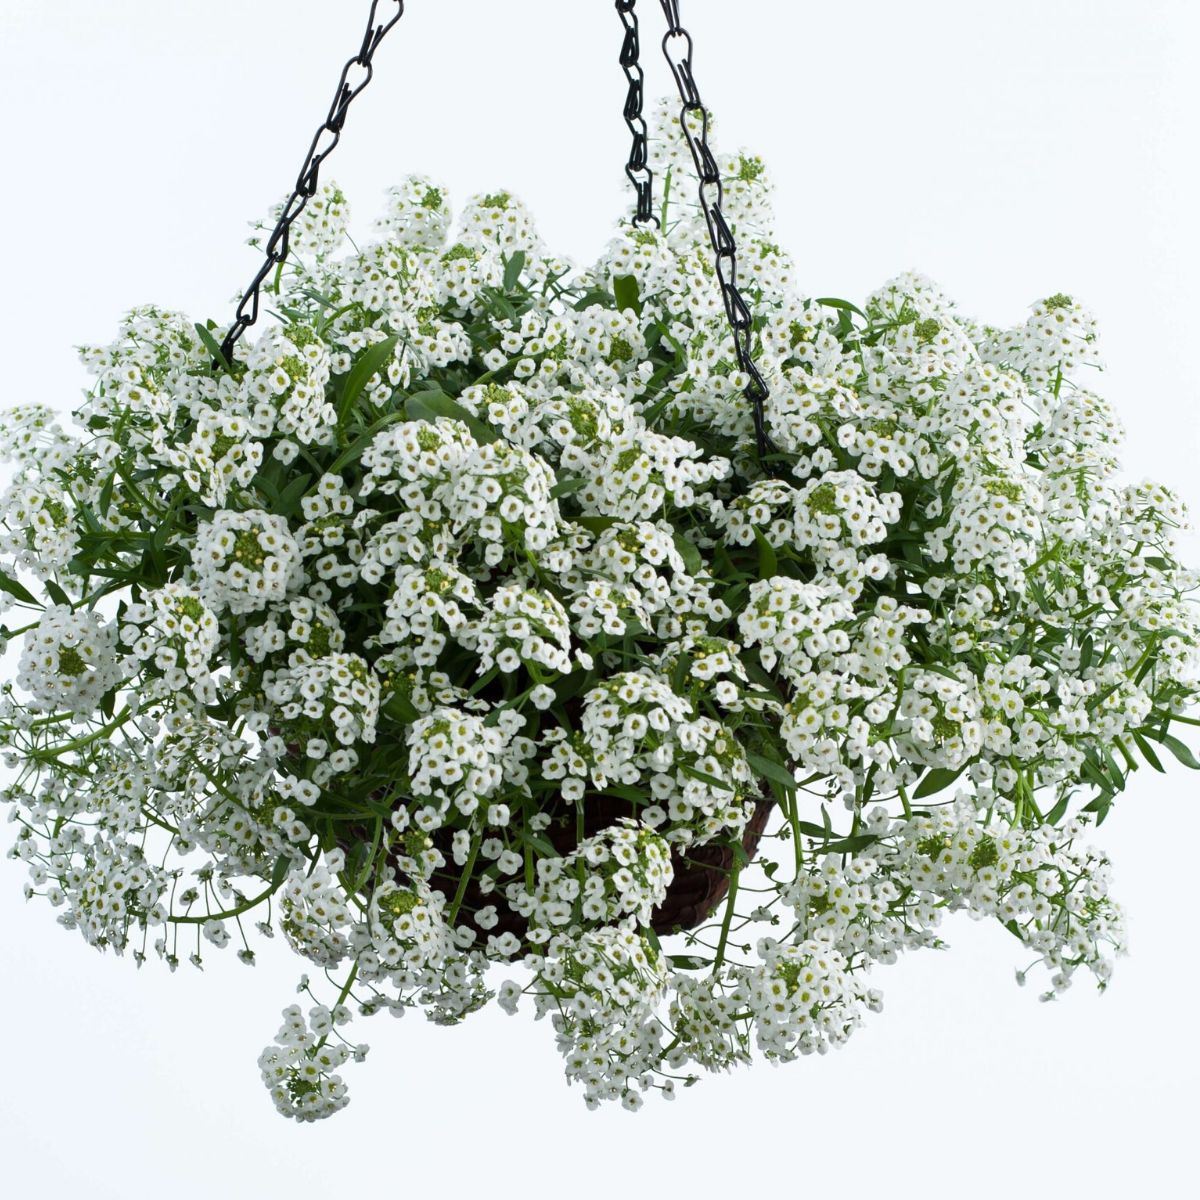 Sweet Alyssum's beautiful white blooms makes it a perfect flower for hanging baskets on Thursd